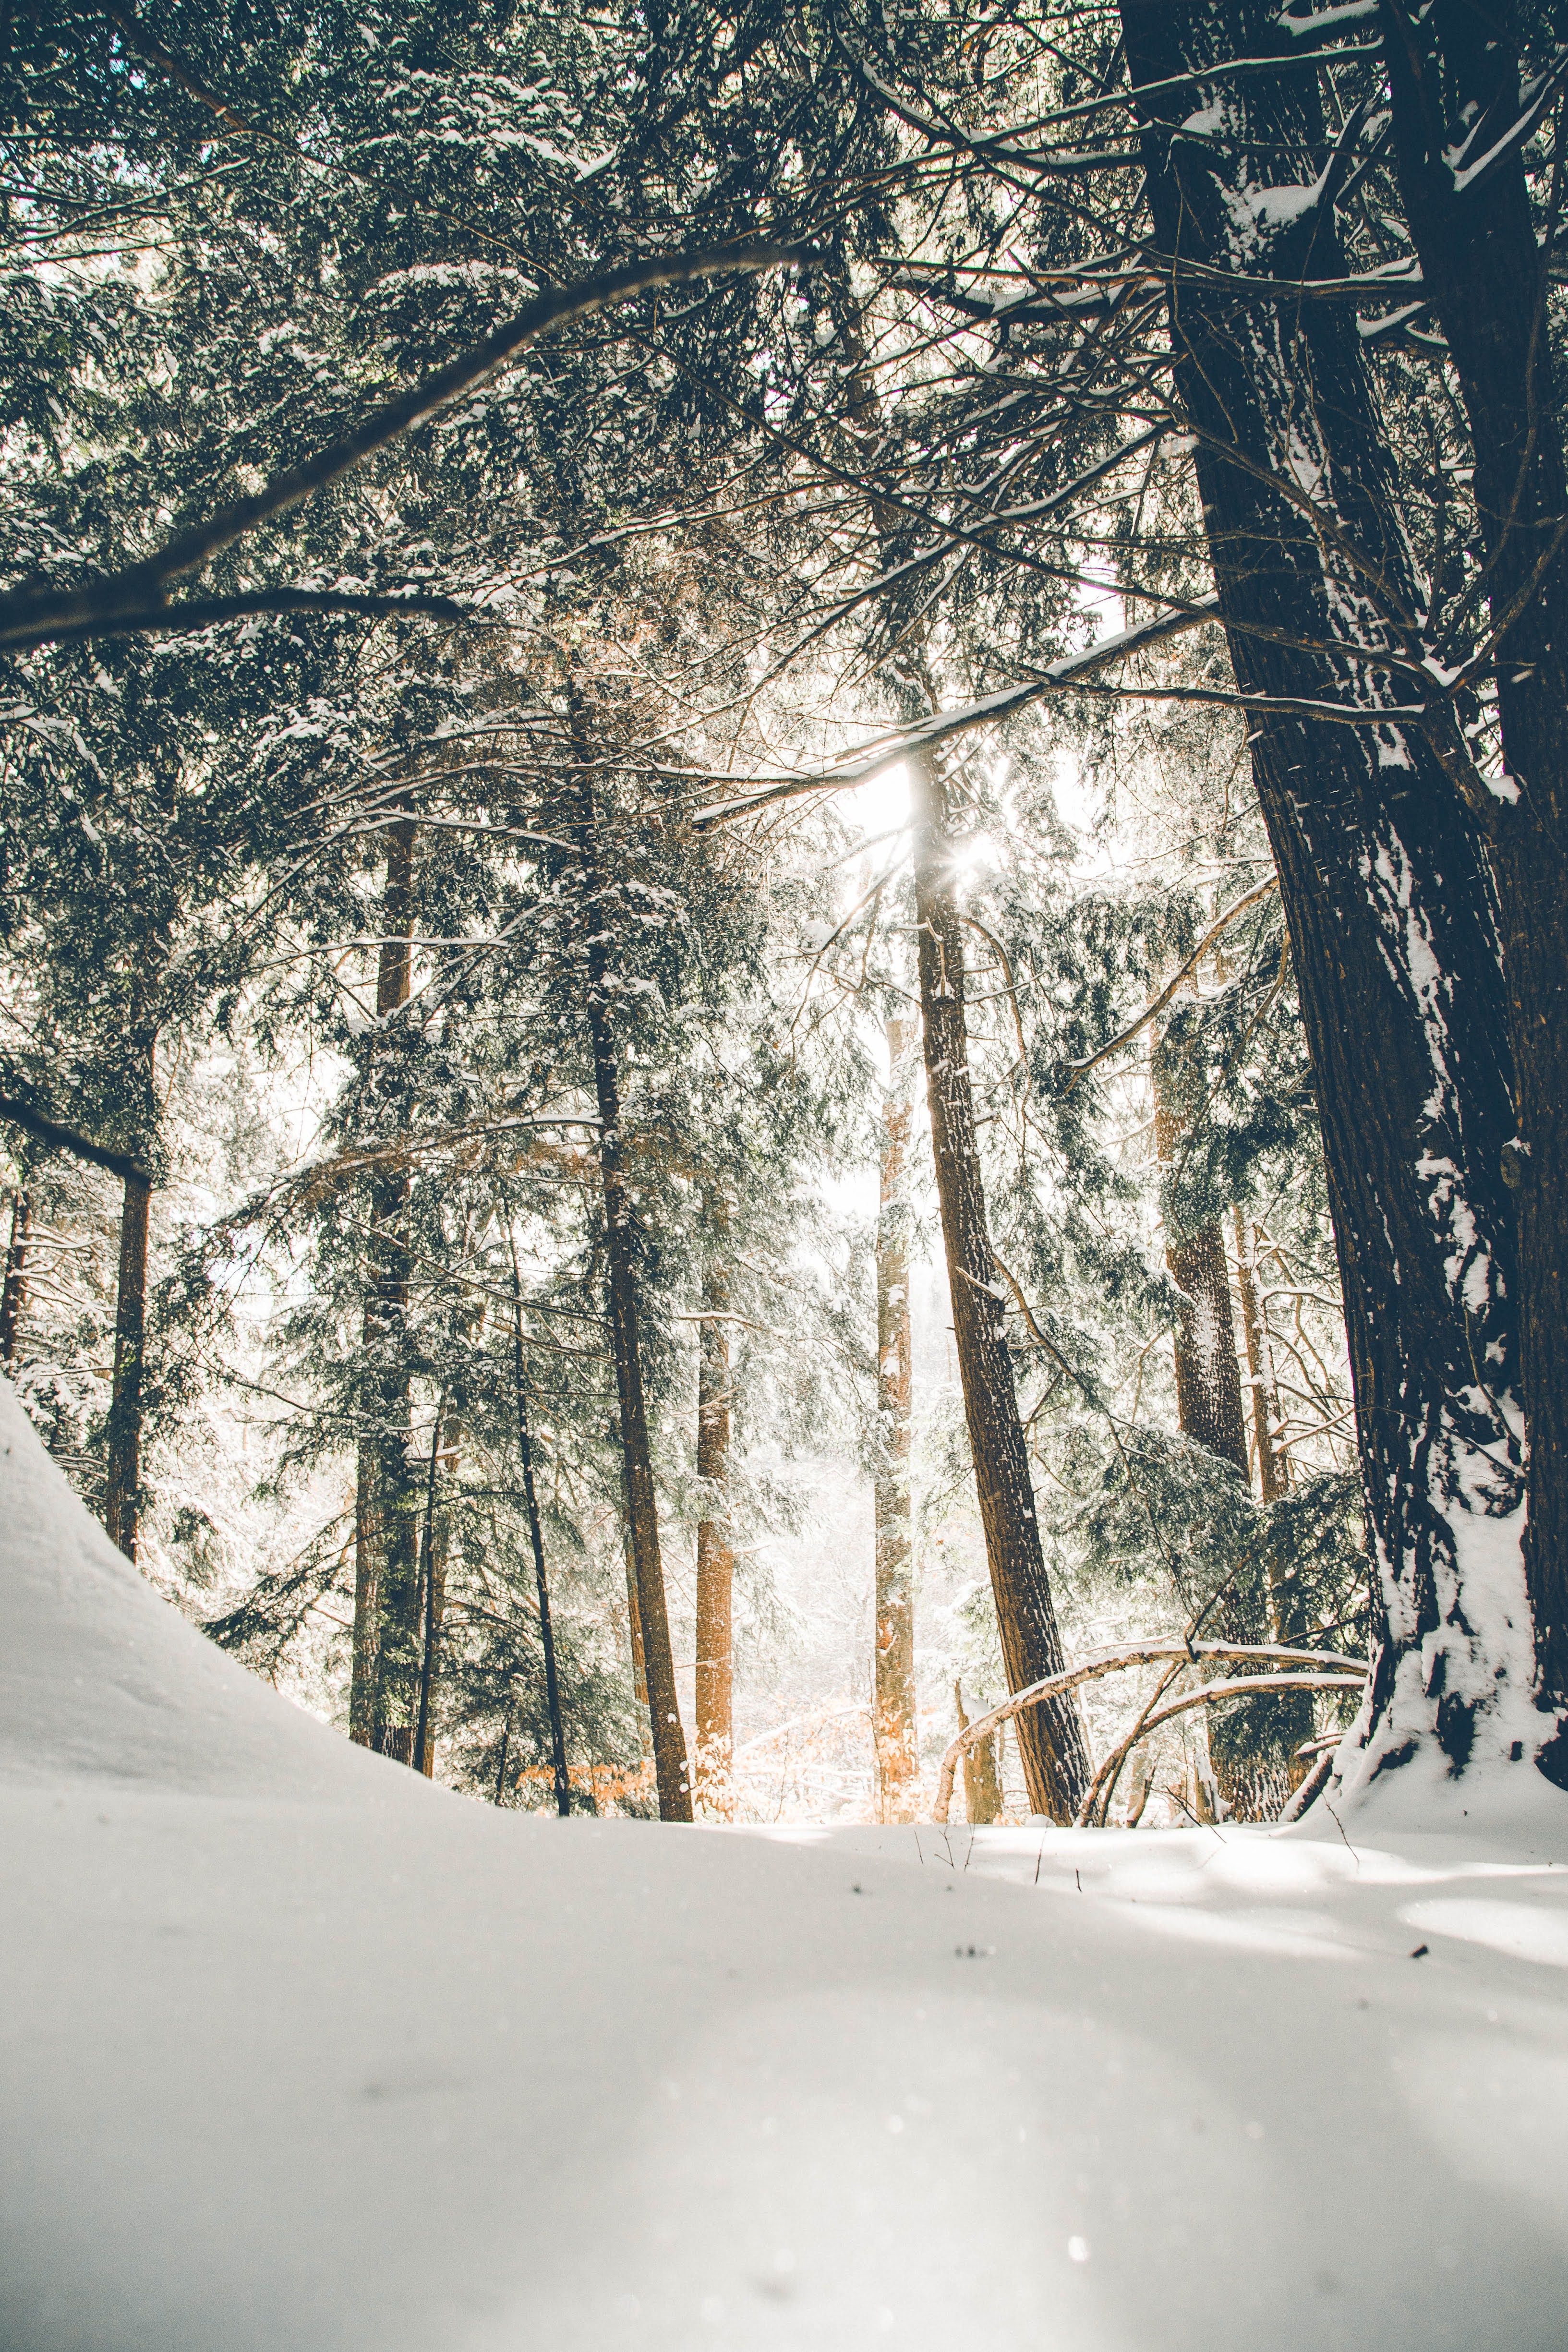 Trees Covered with Snow during Daytime | Photo by Donnie Rosie via Unsplash